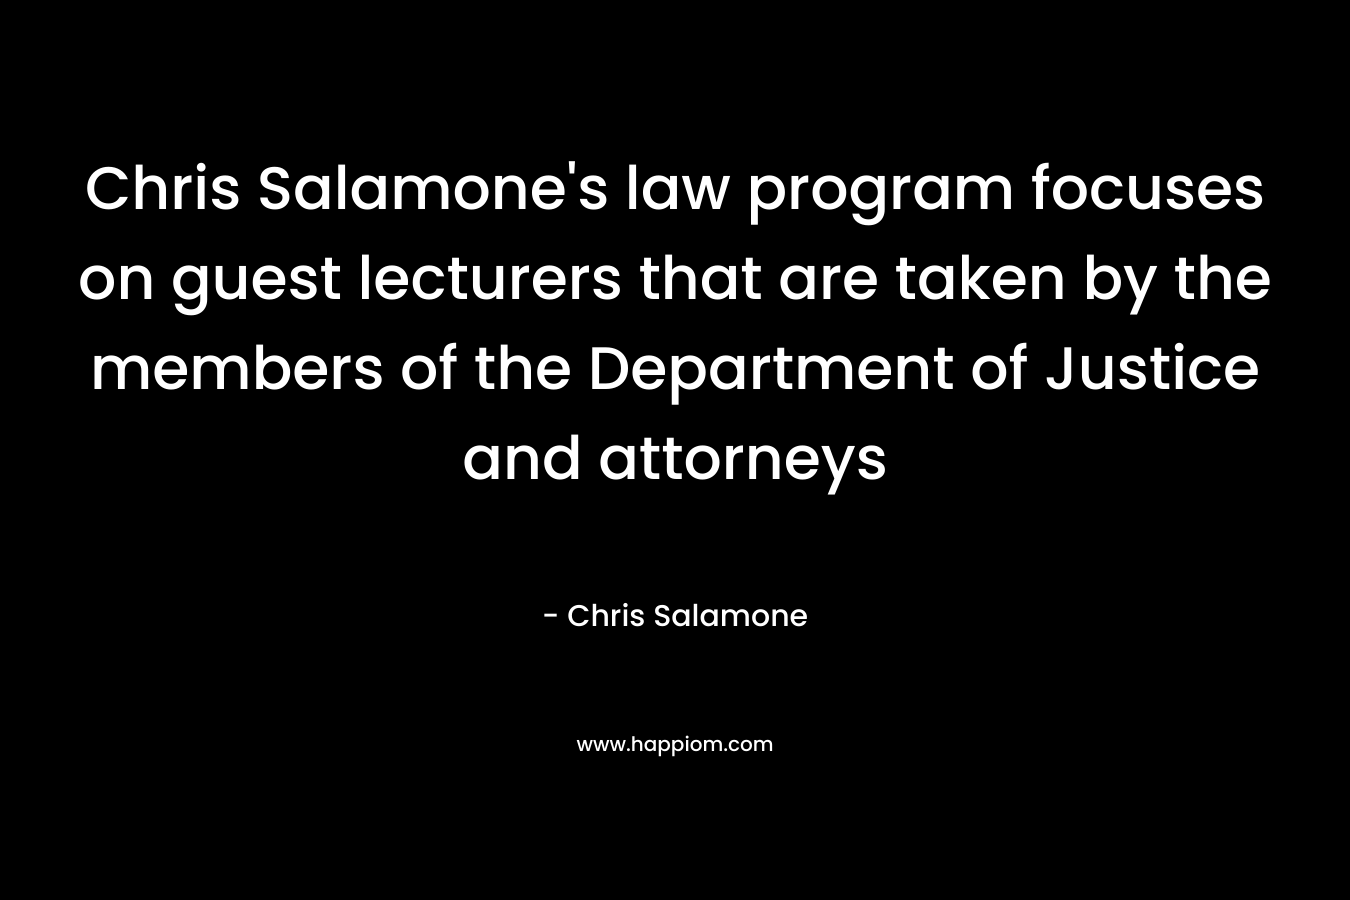 Chris Salamone’s law program focuses on guest lecturers that are taken by the members of the Department of Justice and attorneys – Chris Salamone